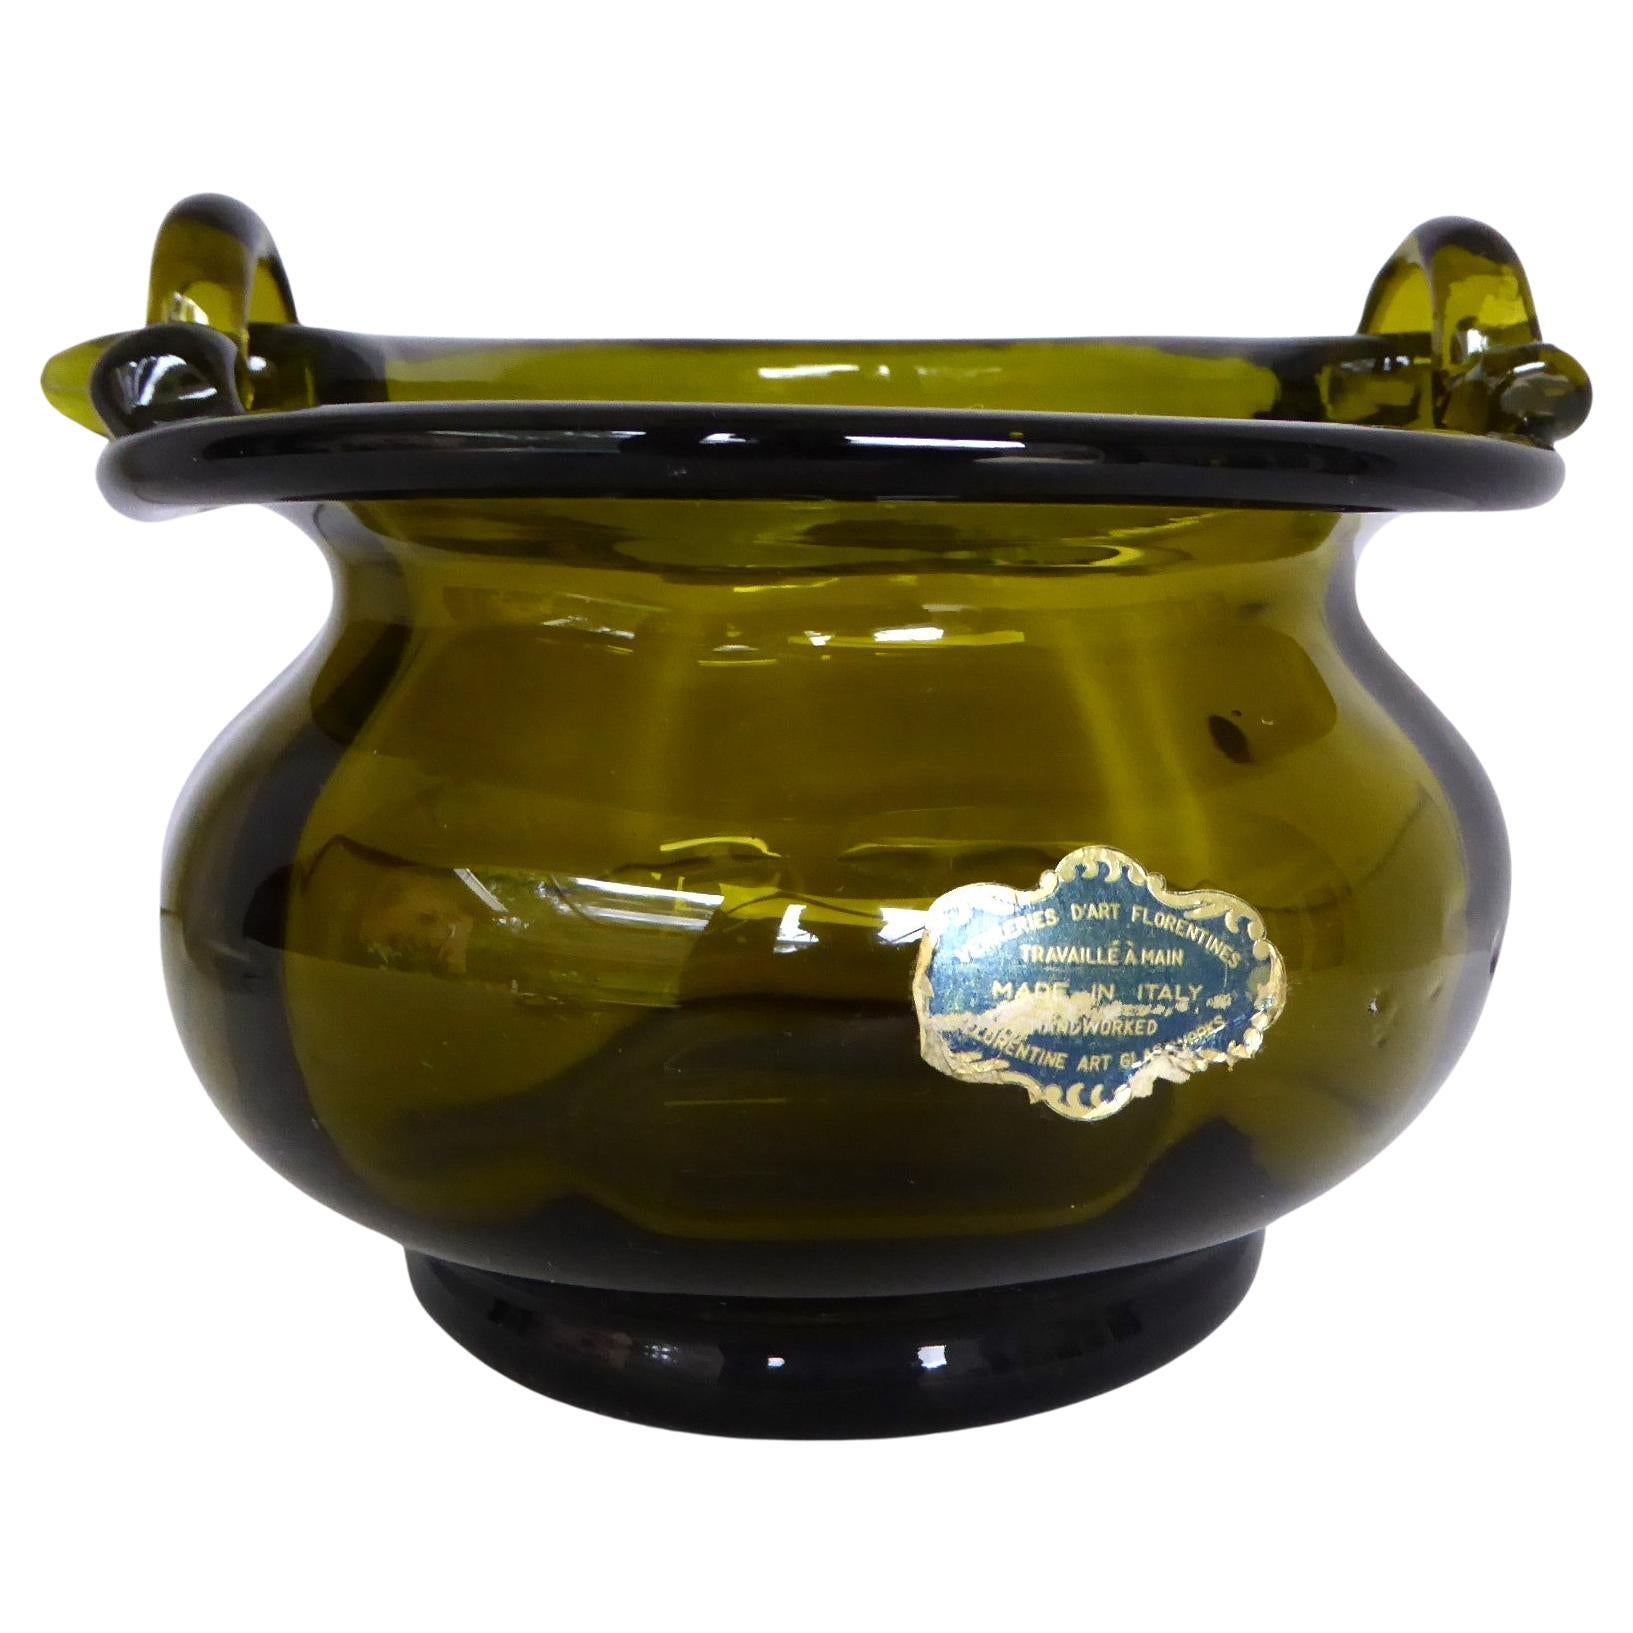 Italian Mid Century hand-made olive Green glass basket with handle made by Florentine Art Glassworks in the 1960s.  The vessel has an undulating body and the handle is secured by 2 glass holders on the rim of the body.   Please note, the handle does